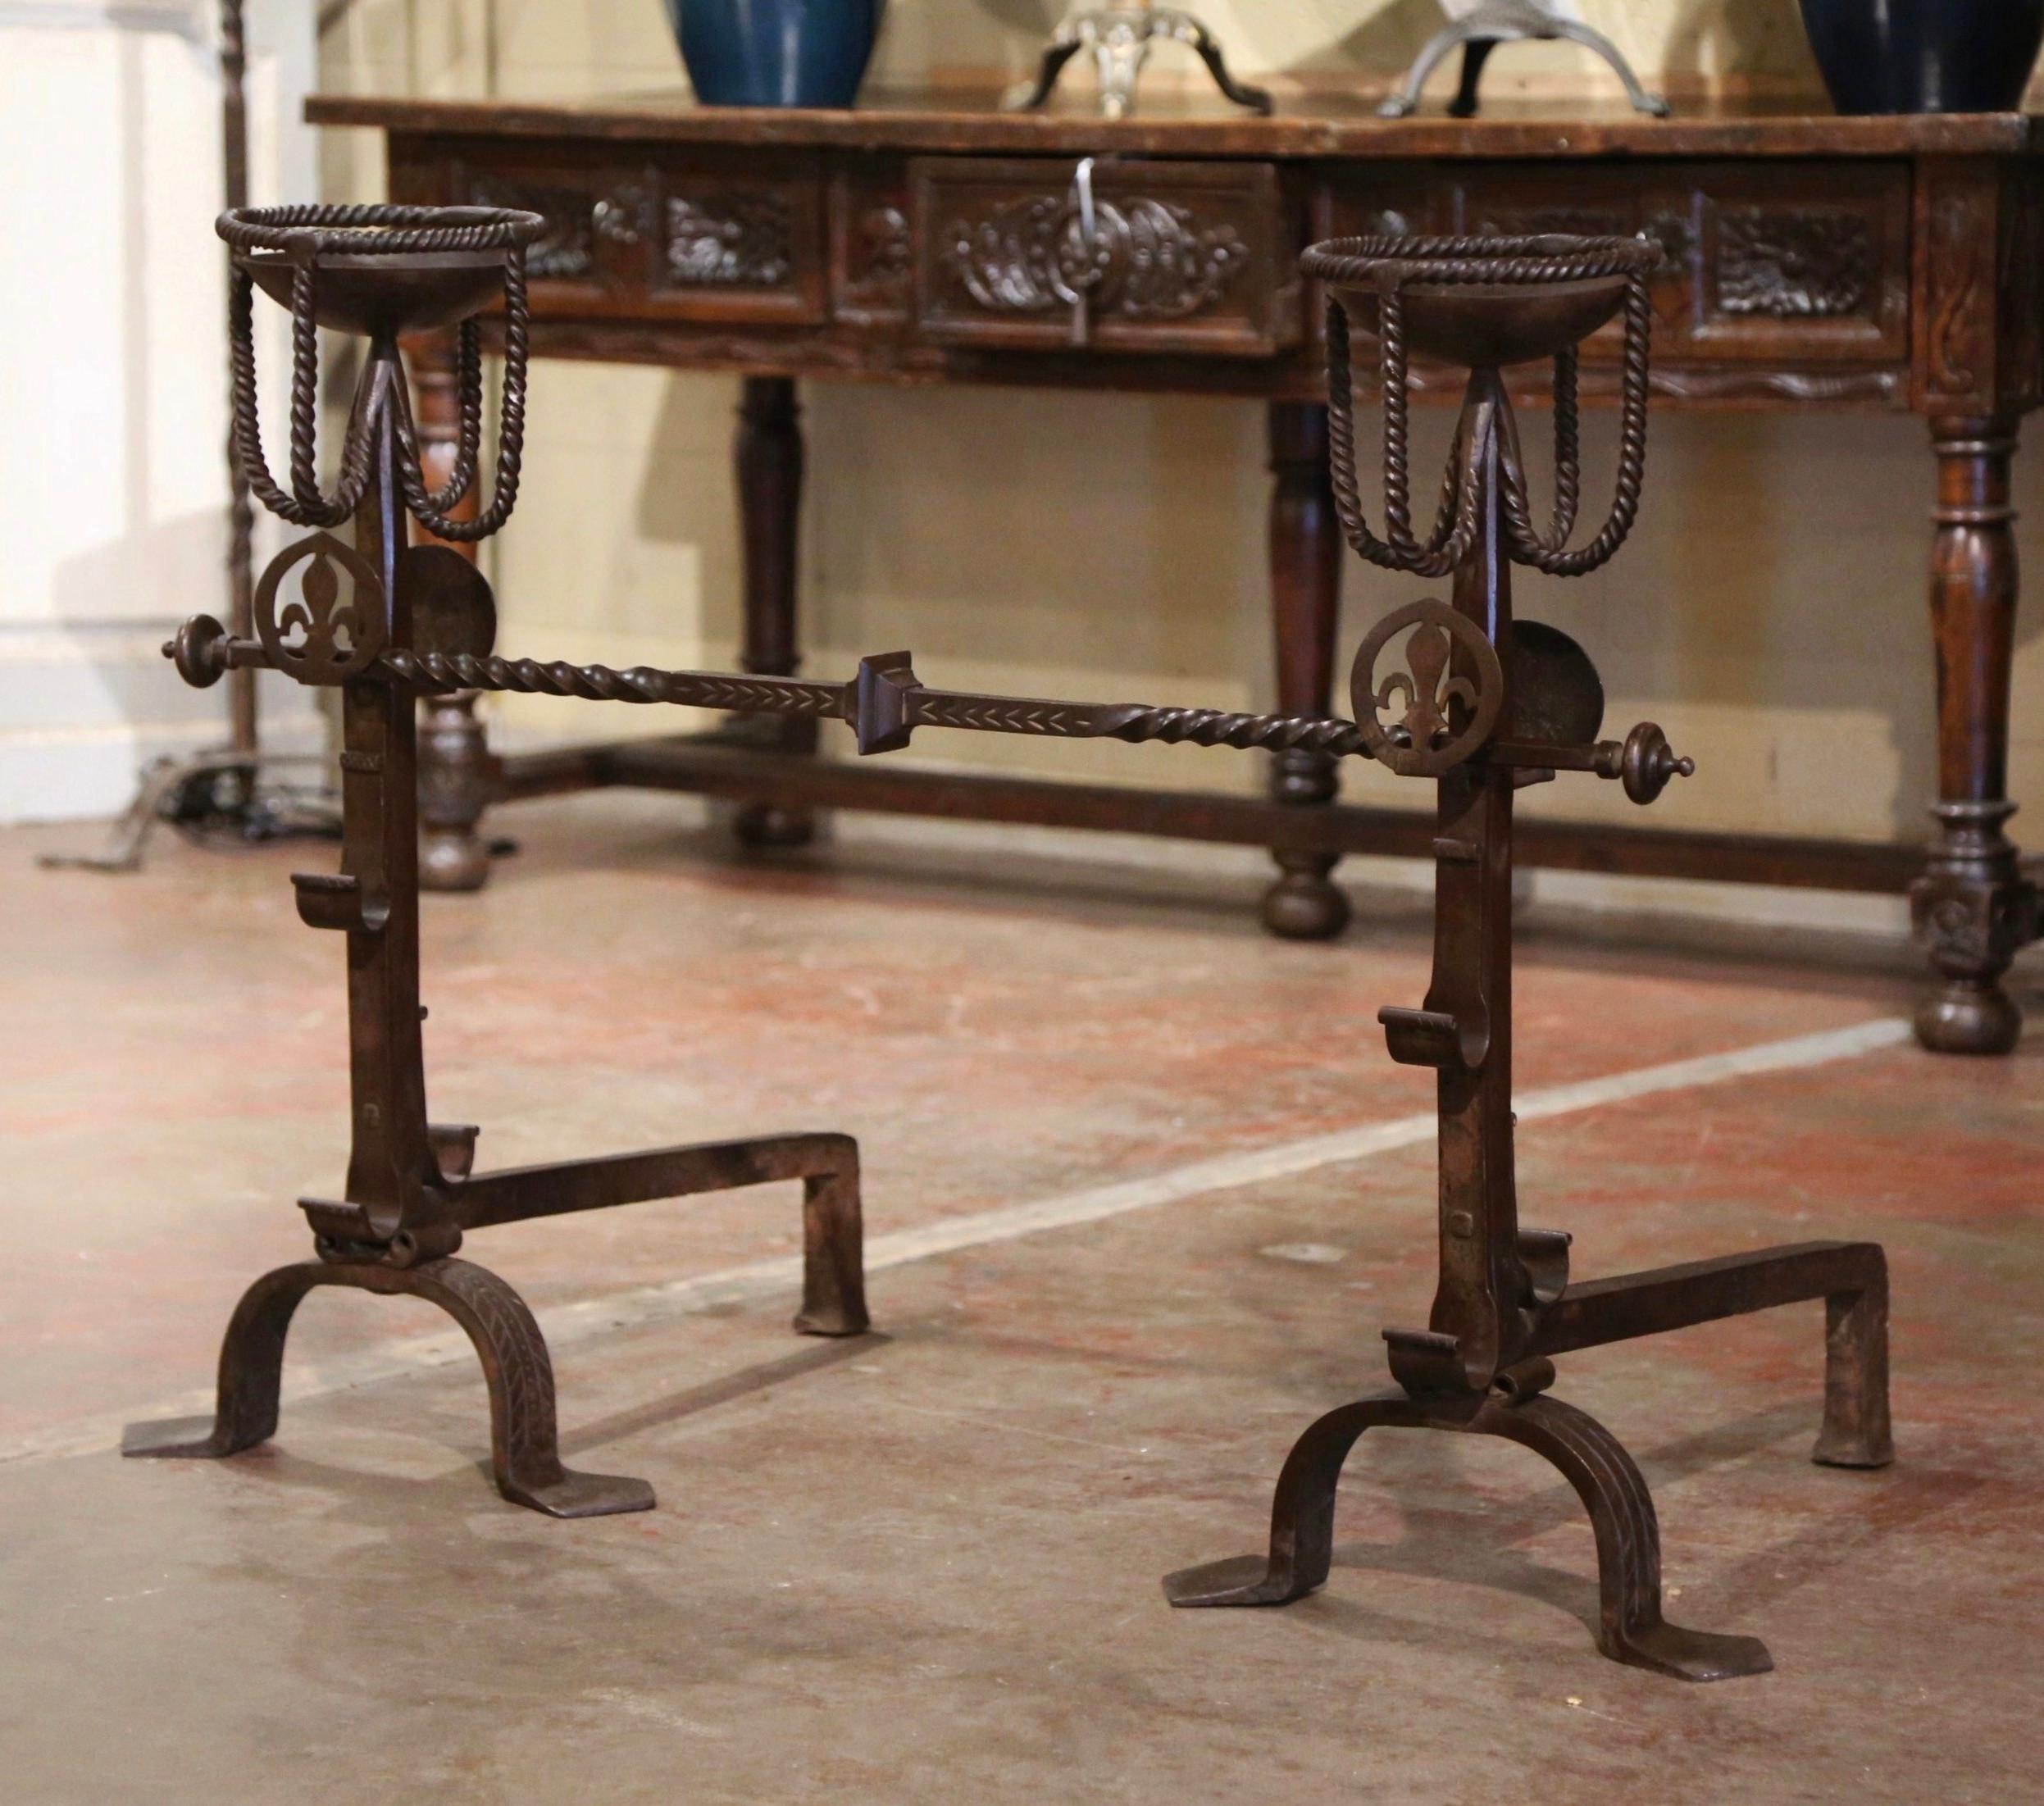 Patinated Pair of 19th Century French Wrought Iron “Landiers” Andirons with Fleur de Lys For Sale